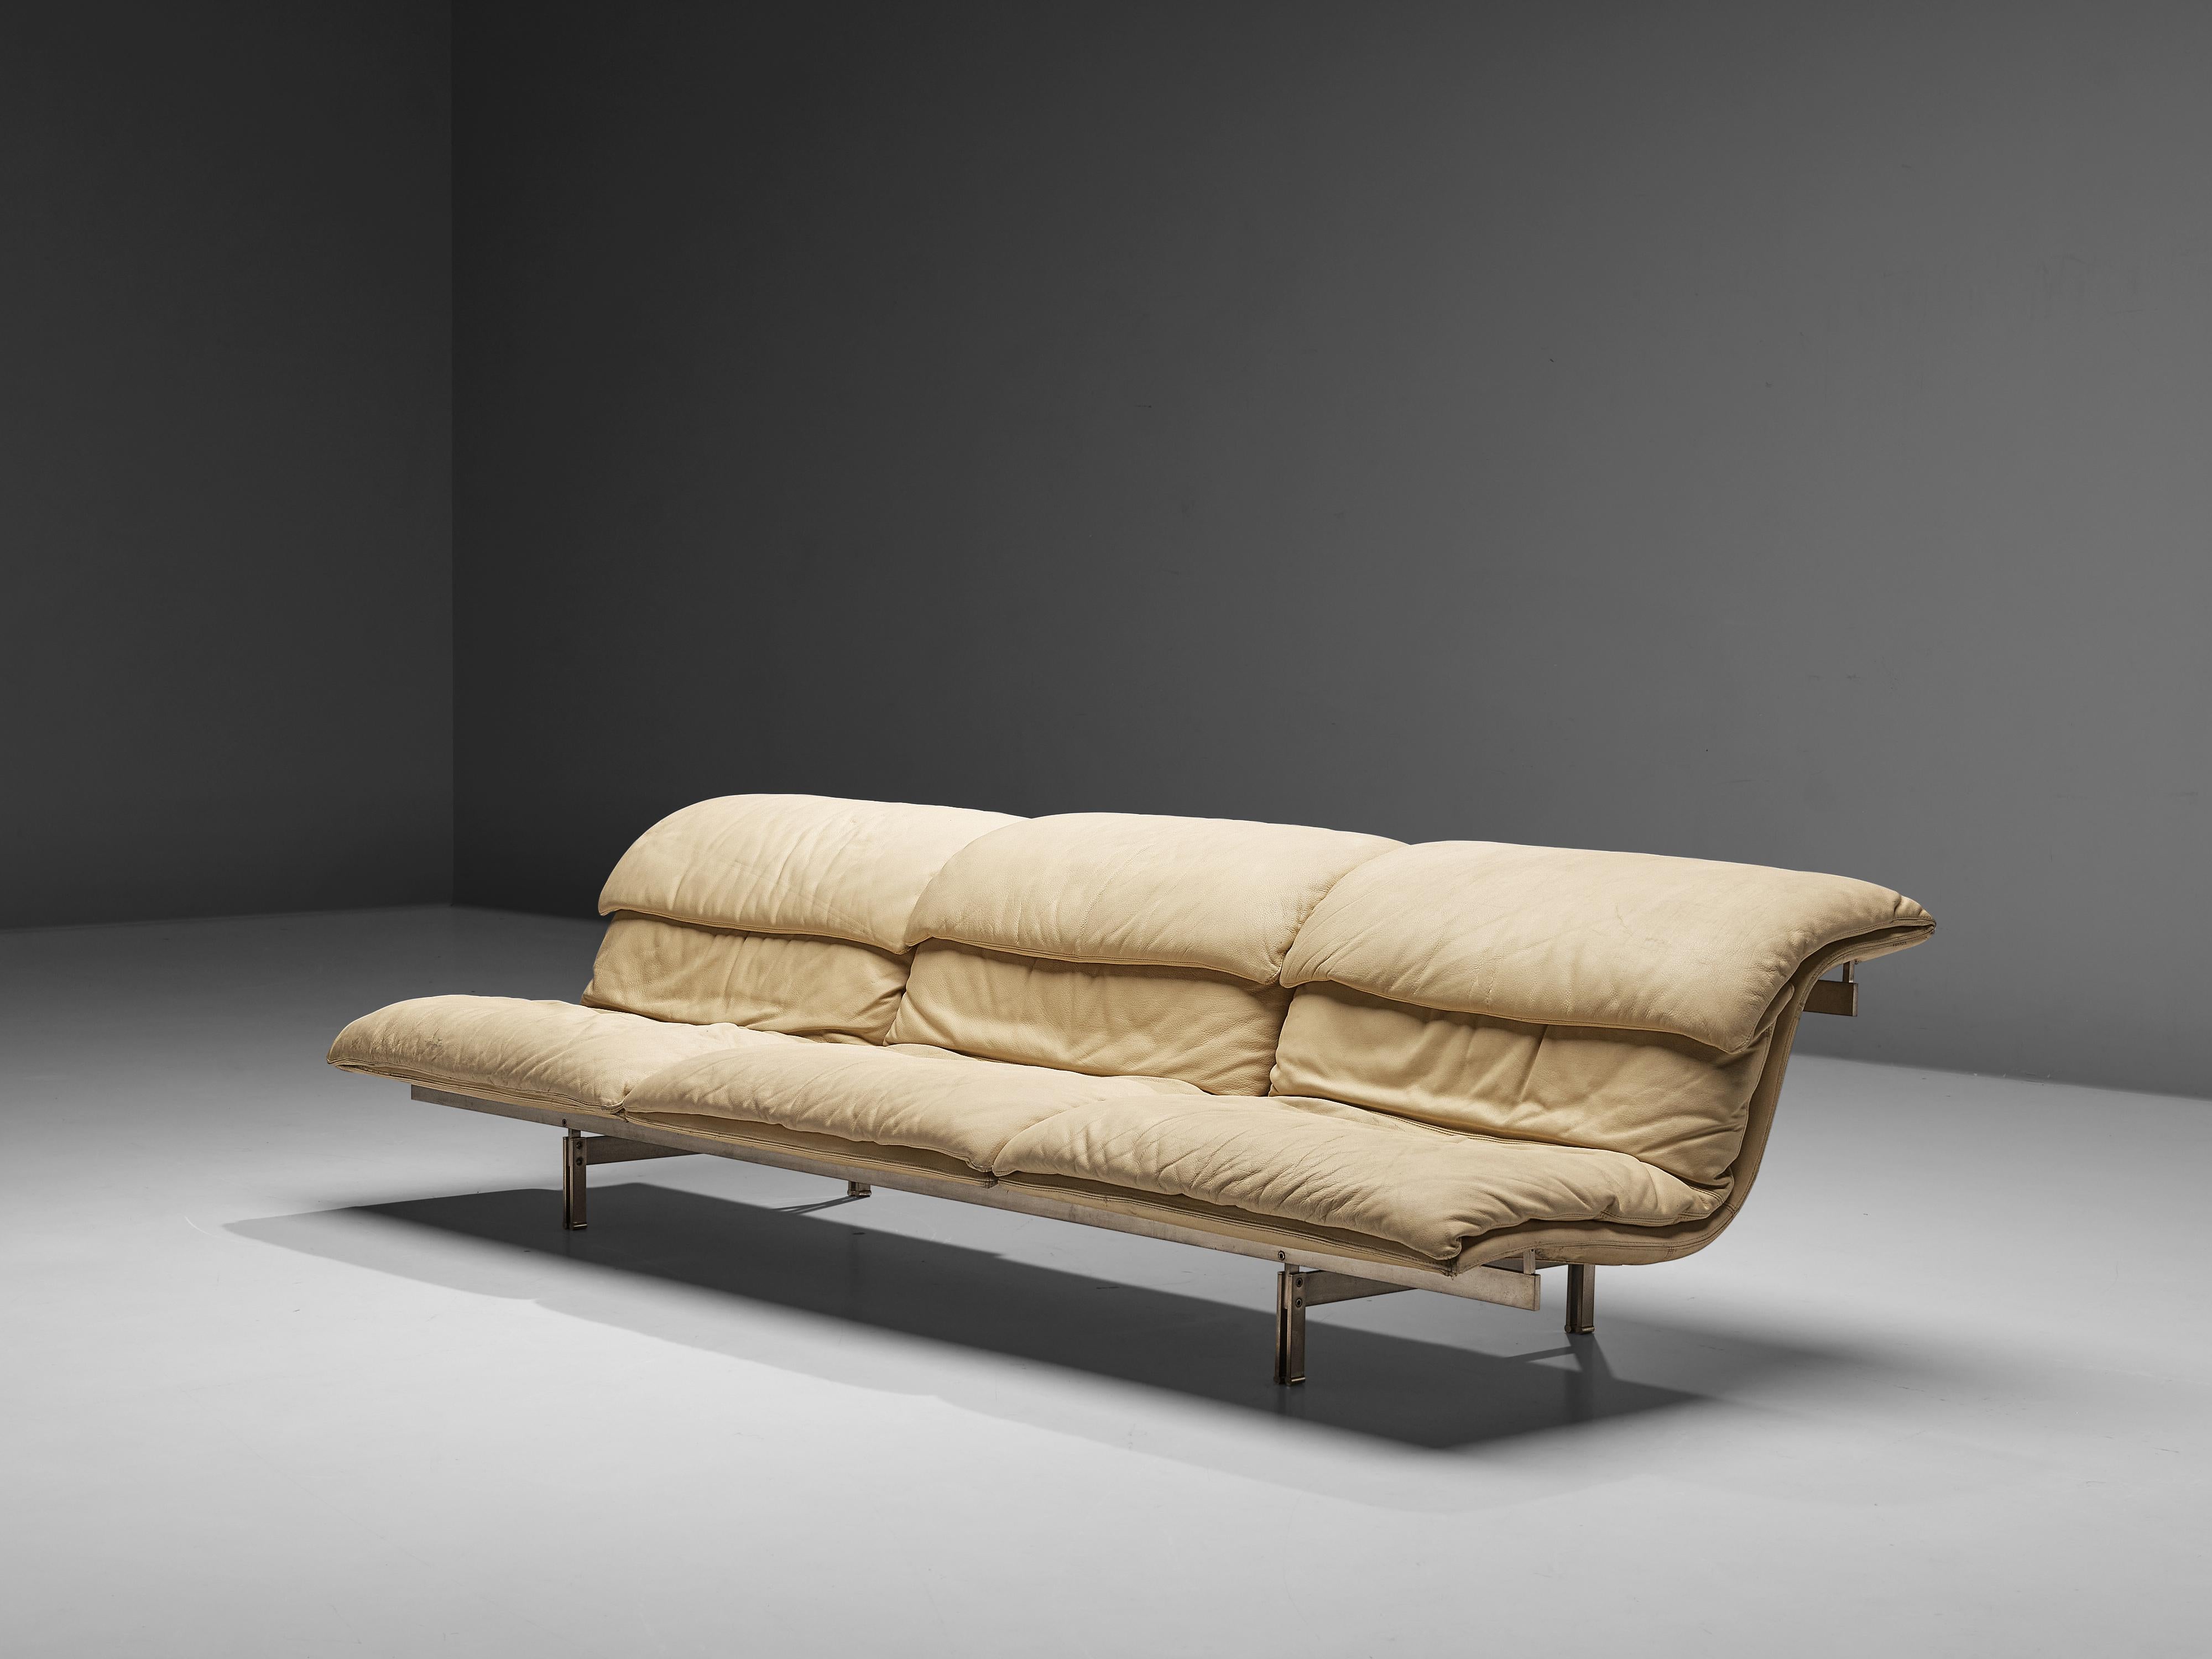 Giovanni Offredi for Saporiti, sofa, beige leather, steel, Italy, 1970s.

This iconic 'wave' sofa was designed by Giovanni Offredi in the 1970s. The design for this sofa is dynamic, sculptural and figurative. The sofa is archetypical for Italian